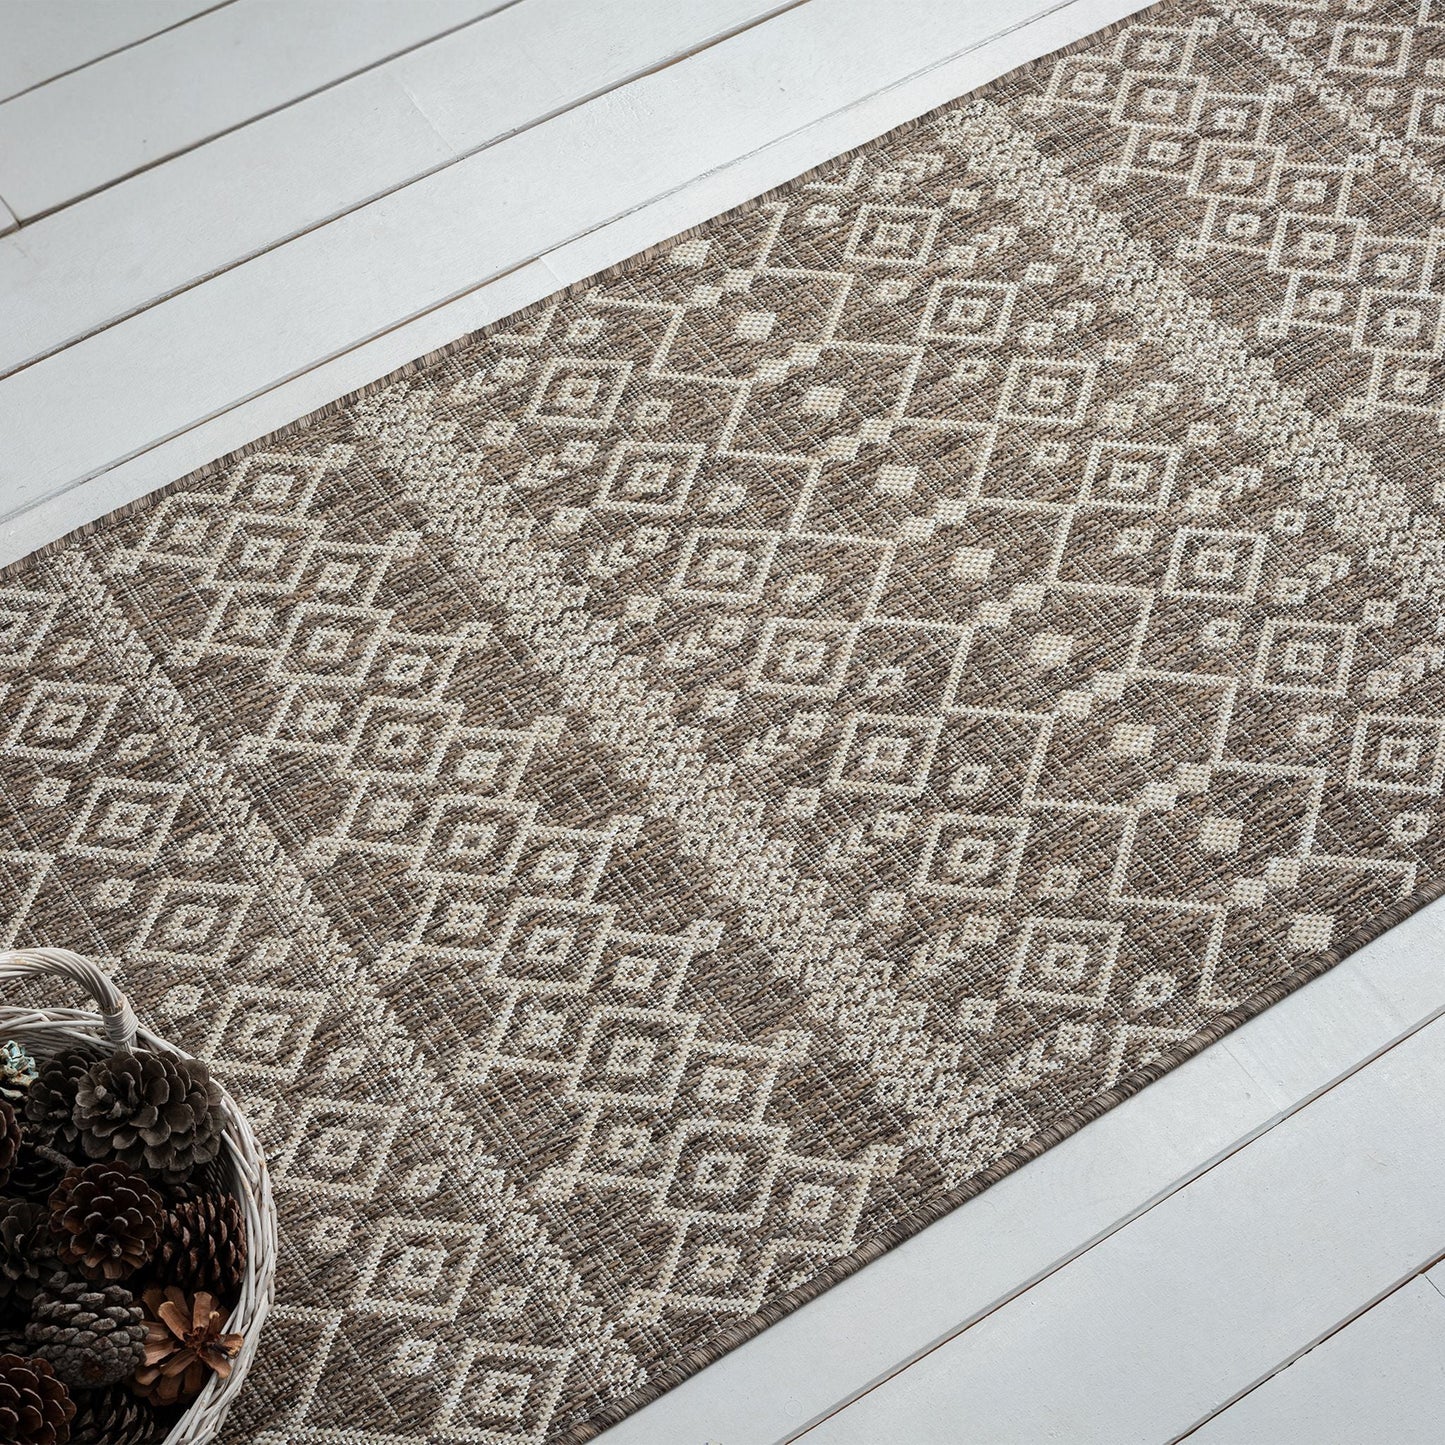 Patio 451 Almond In Brown Rug